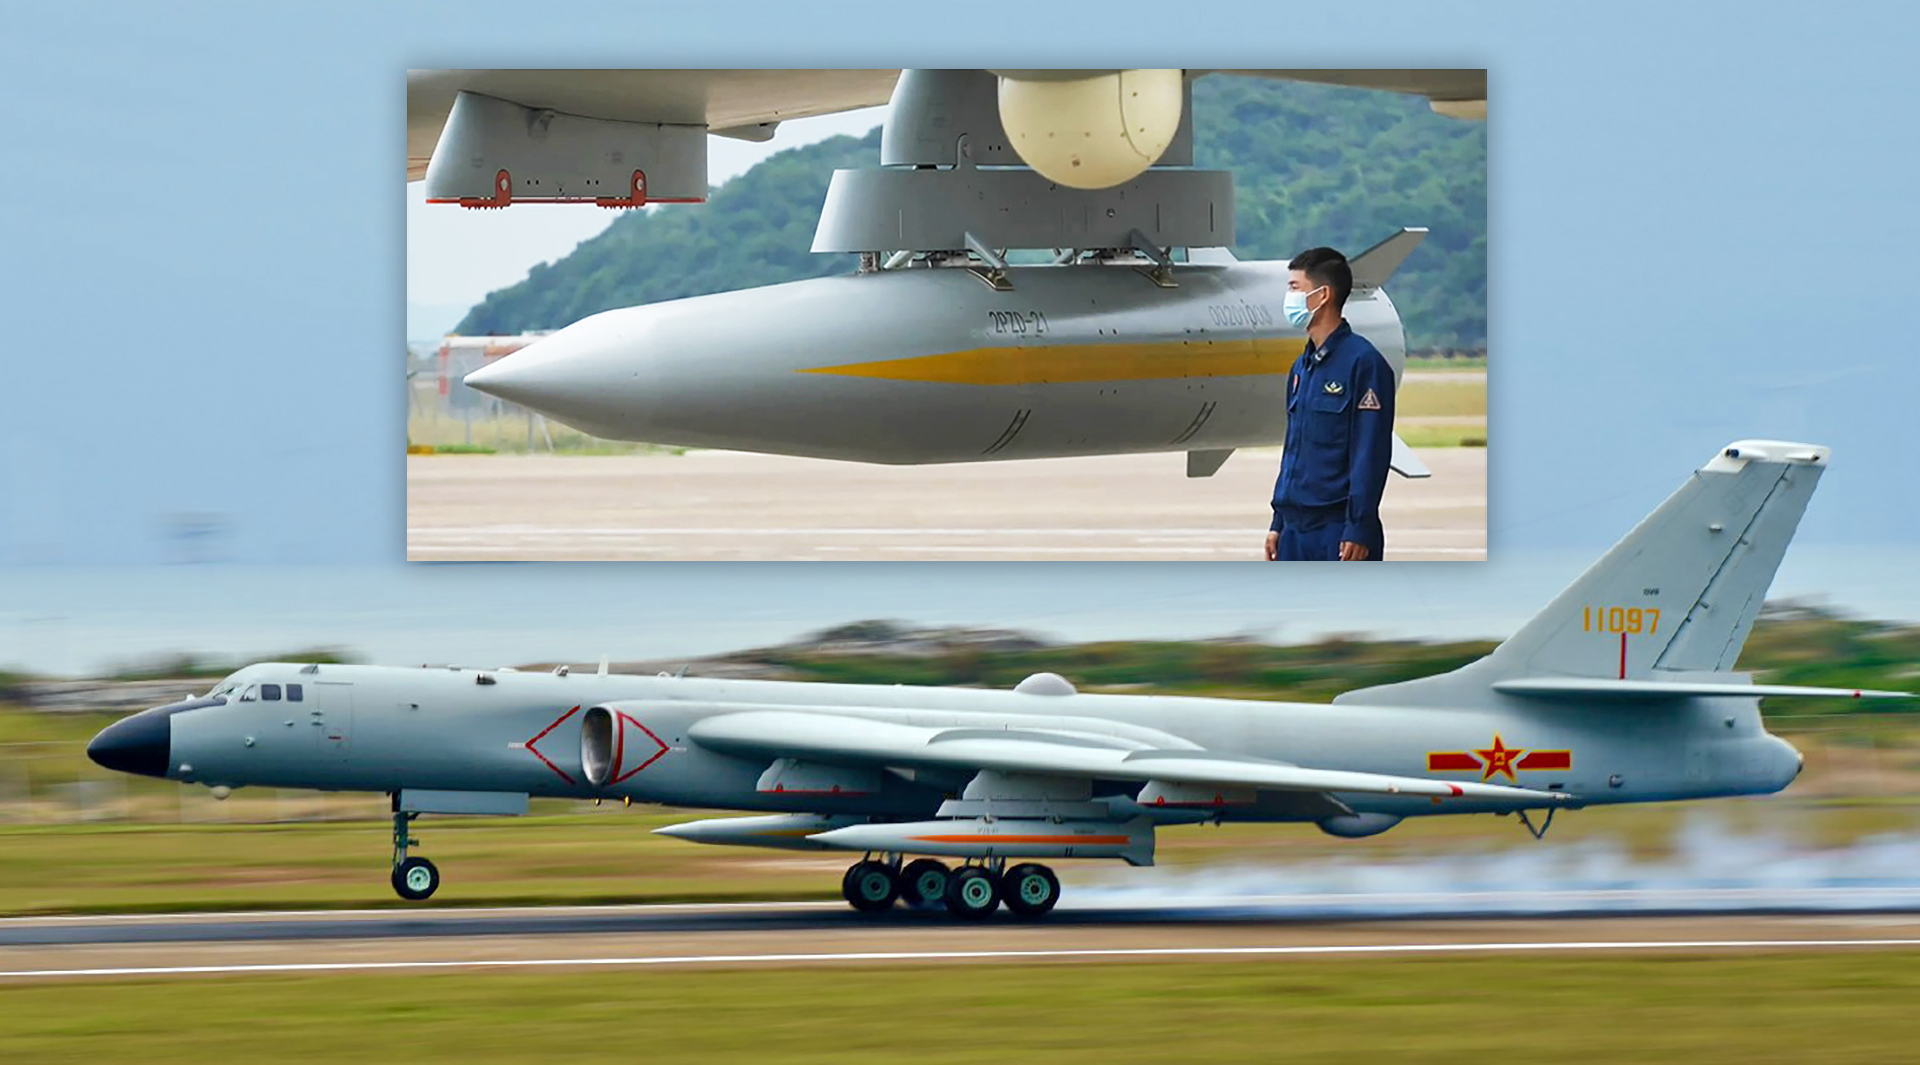 H-6K Bomber Spotted With New Air-Launched Ballistic Missile